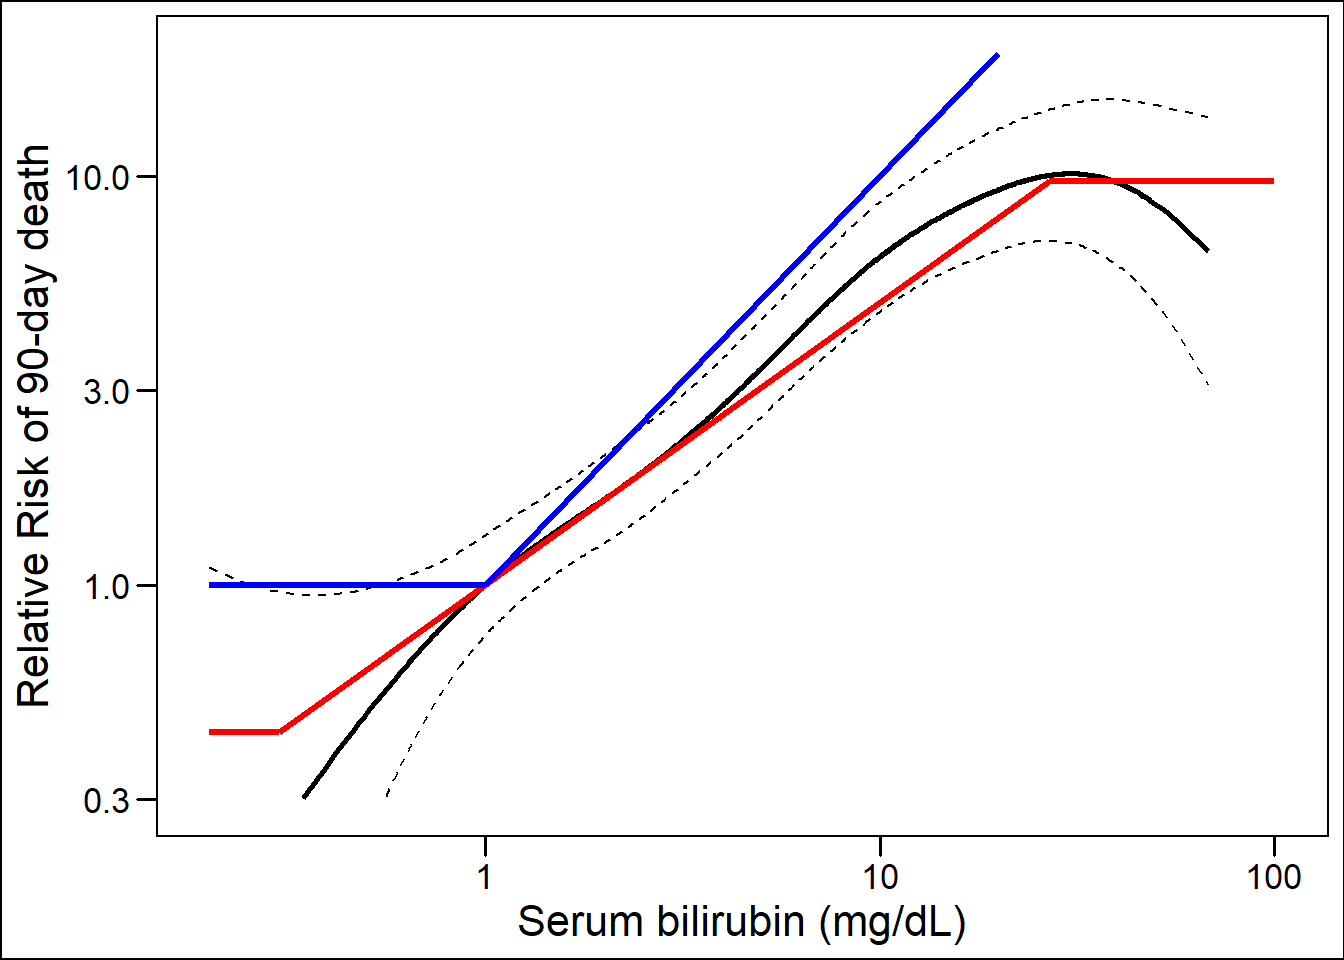 In the validation data, the relation with 90-day mortality is shown. The coefficients and boundaries of creatinine in reMELD (red) and UNOS-MELD (blue) illustrate model fit.